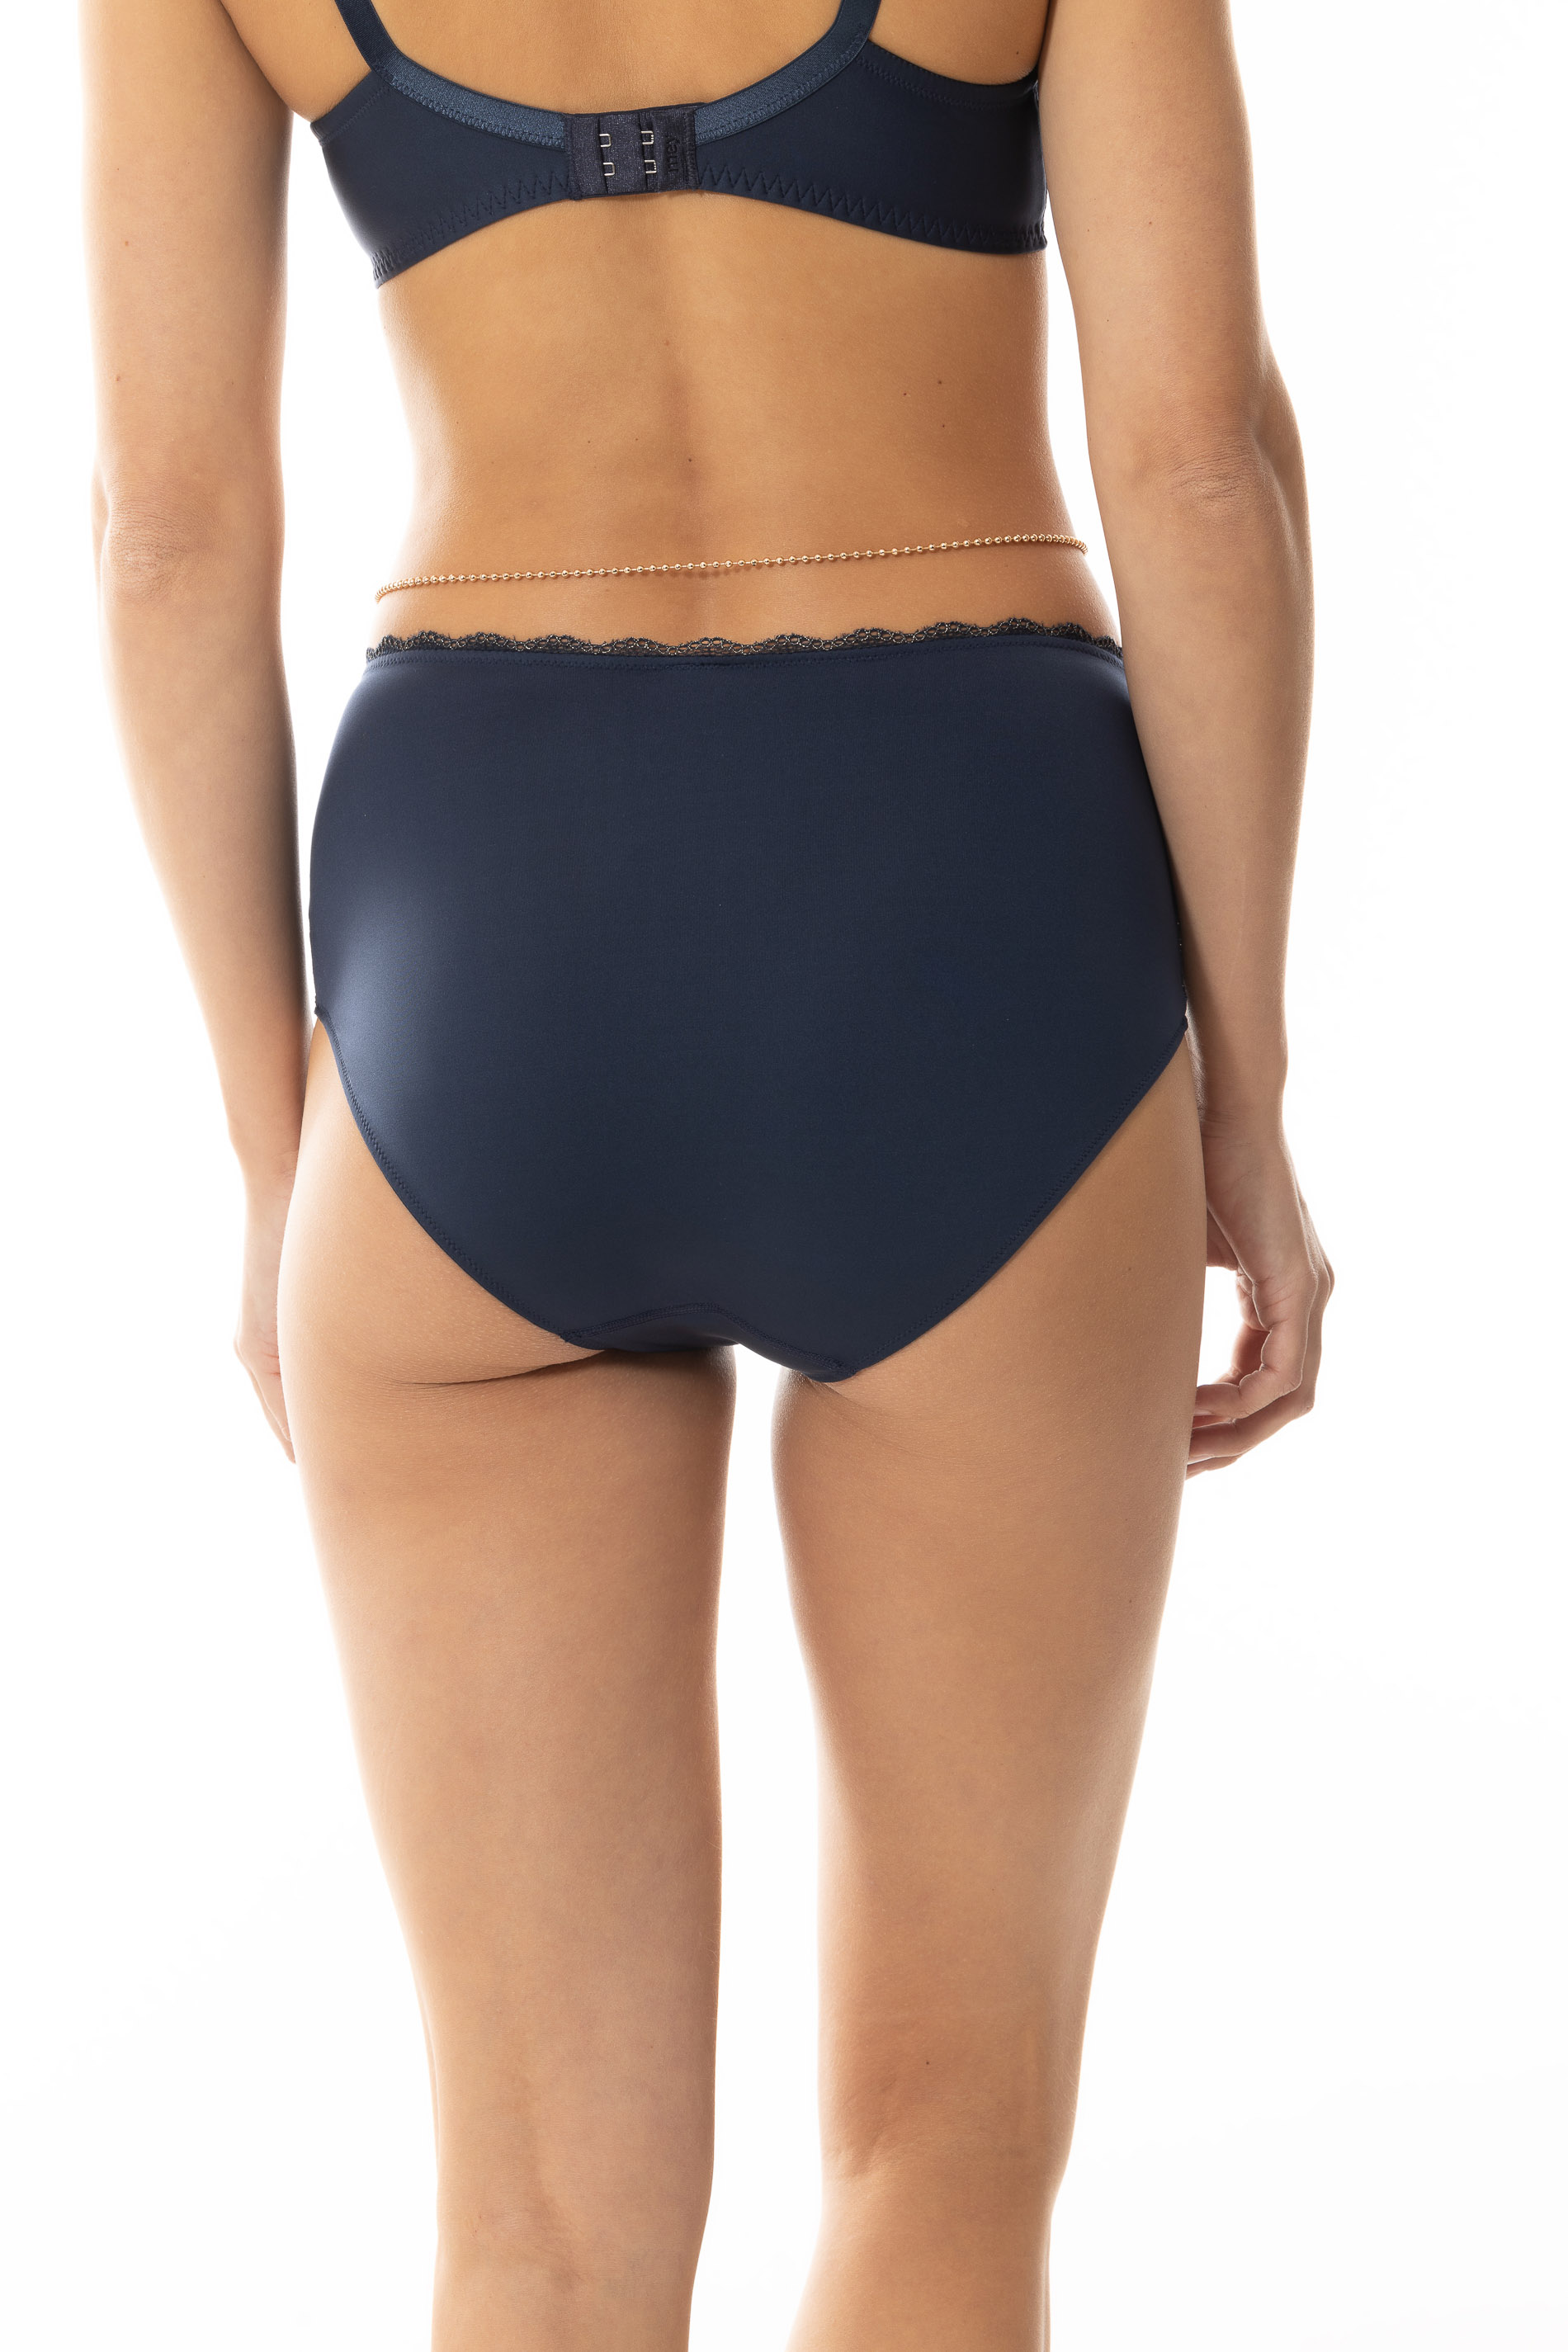 High-waisted briefs Serie Amorous Deluxe Rear View | mey®